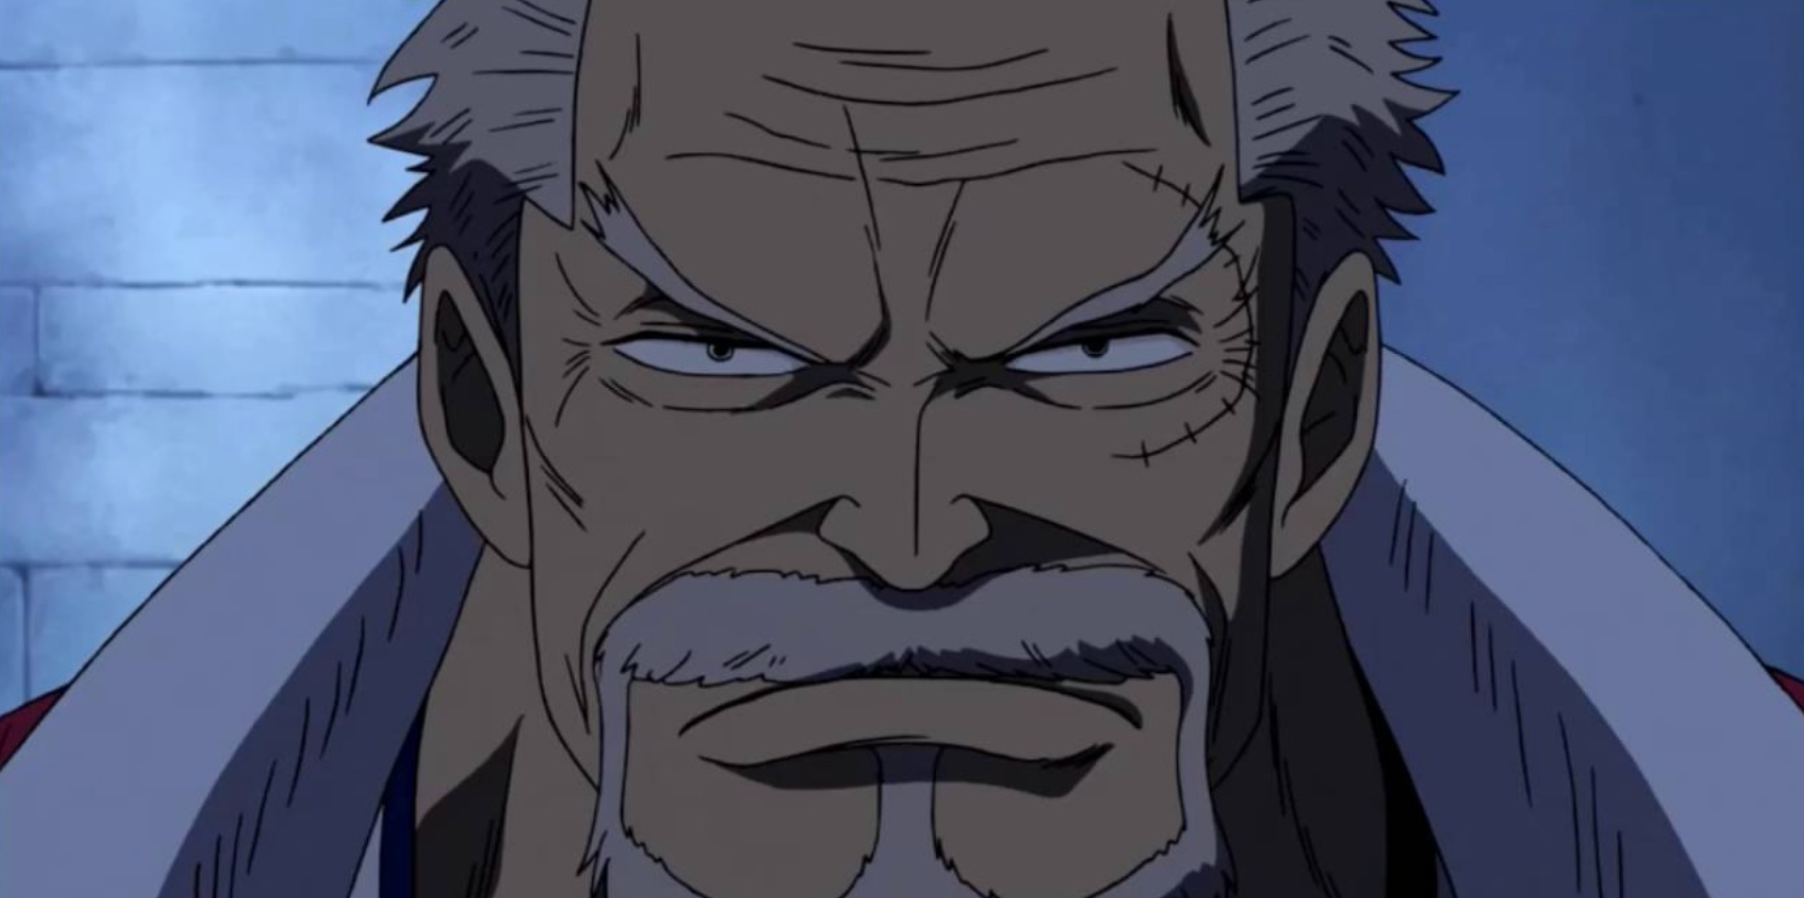 Garp speaking with Ace in prison in One Piece.